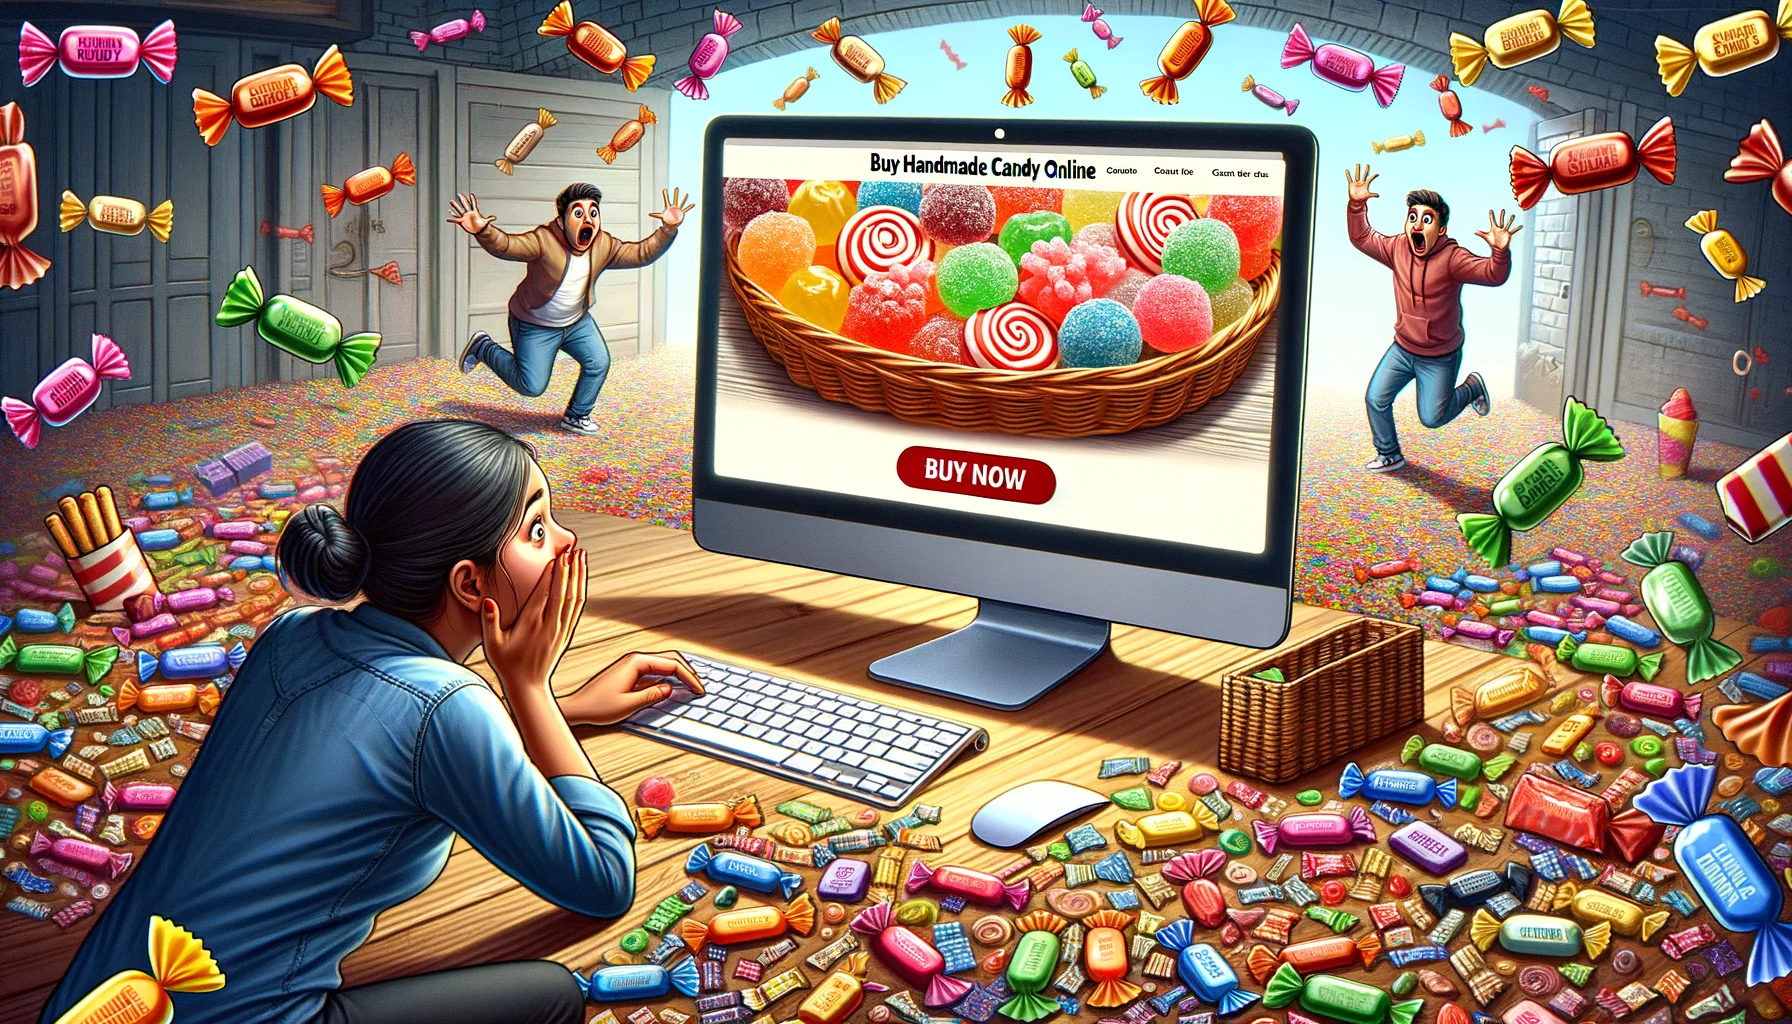 Imagine a humorous and realistic scene showcasing the concept of 'Buy Handmade Candy Online'. A bright and inviting pop-up website is in the center of the image. The website’s homepage displays an array of colorful, tempting handmade candies of various shapes and sizes that’s instantly catching attention. There's a giant red 'BUY NOW' button that's too big to ignore. Just next to the computer, there's a person of Hispanic descent, both surprised and delighted at the sight of the candy. Surrounding the computer is an extreme contrast - a chaotic room full of candy wrappers, showcasing the clear advantage of the online candy shop offer over traditional candy shopping.